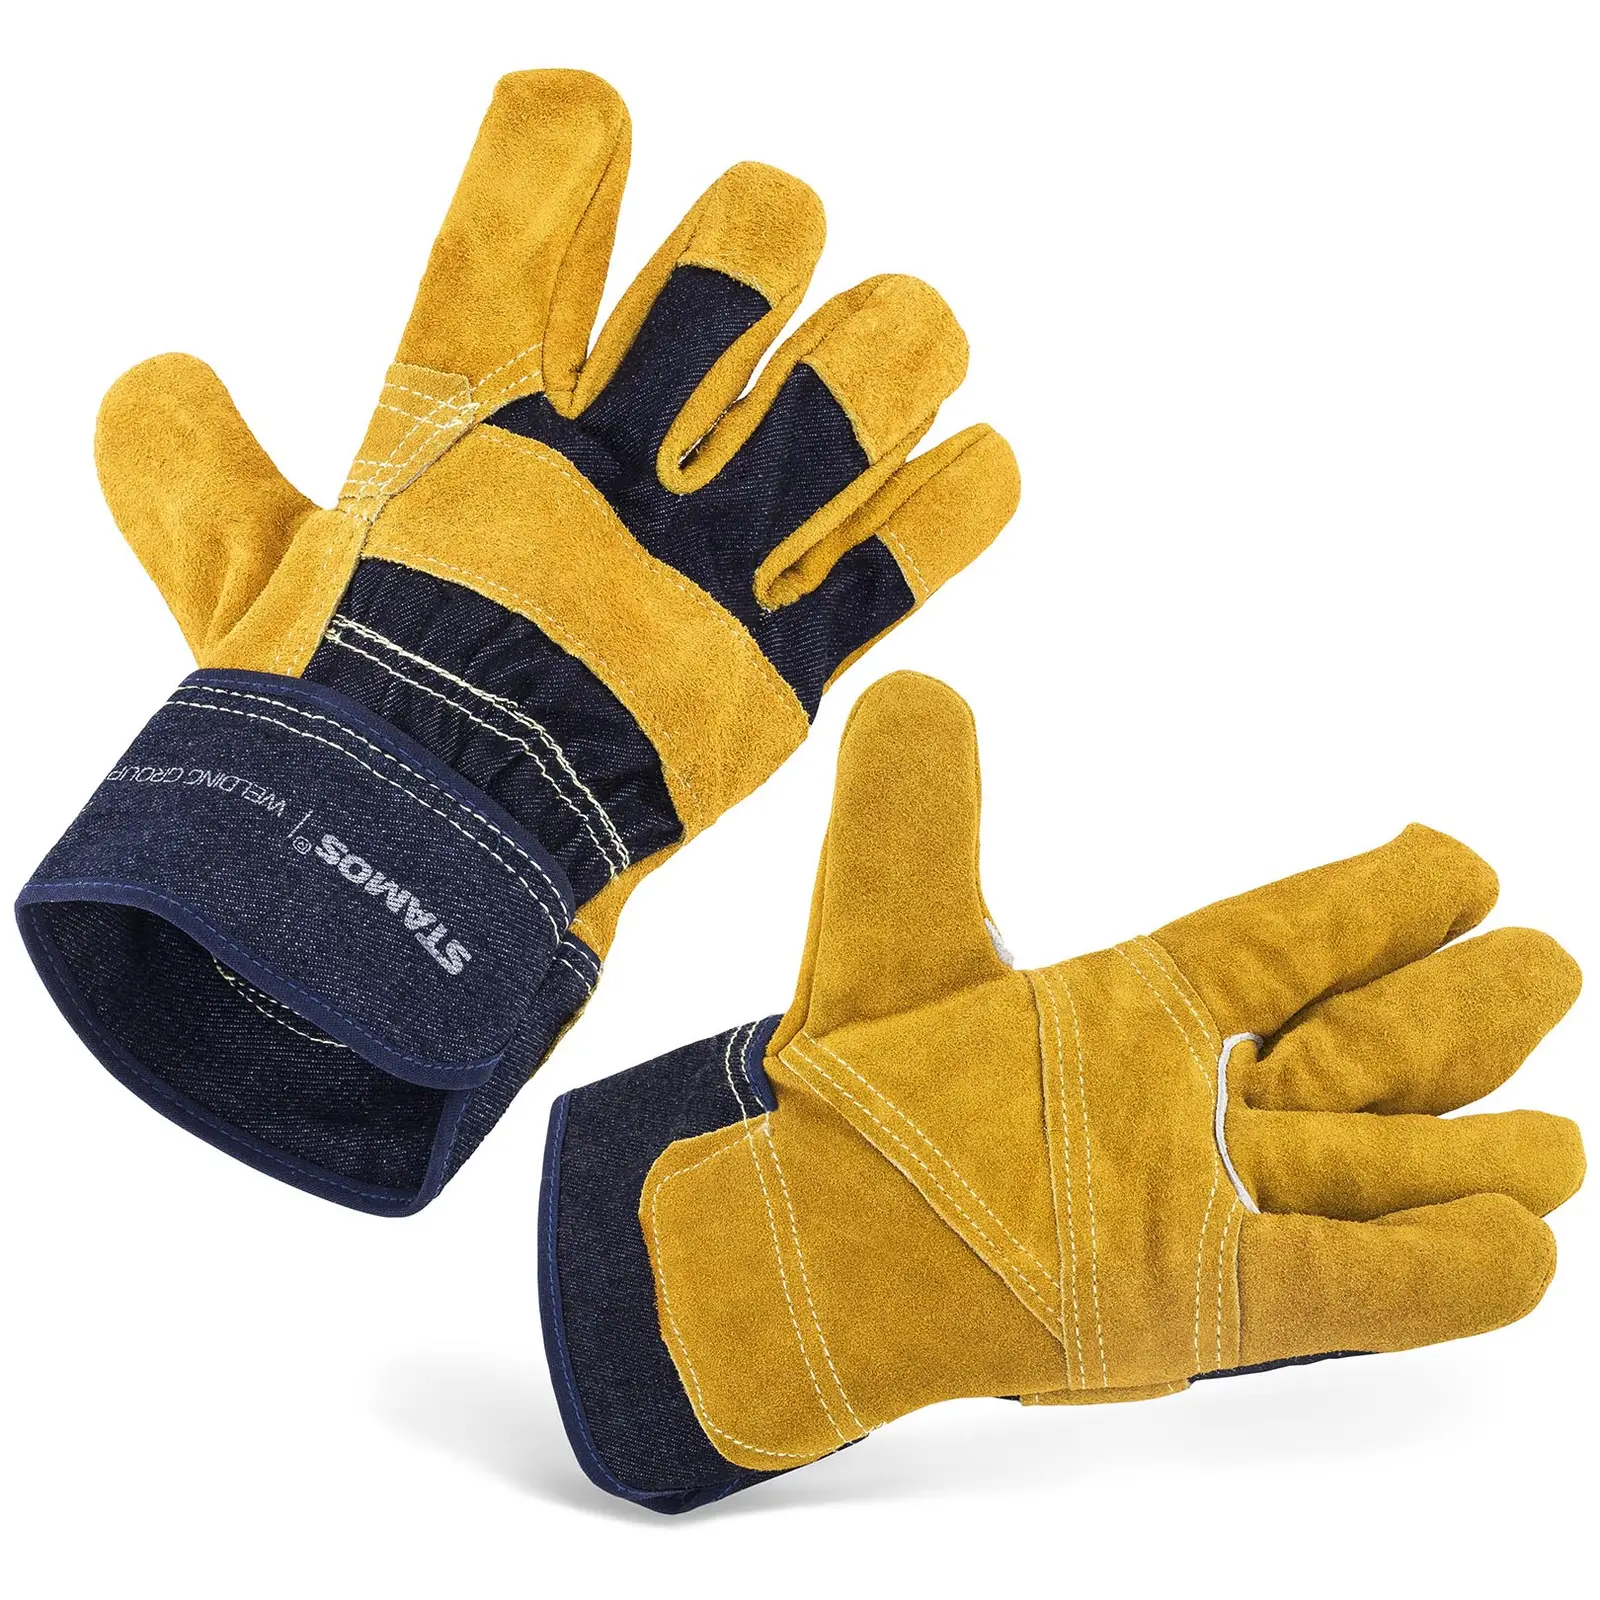 Work gloves - size. L - lined